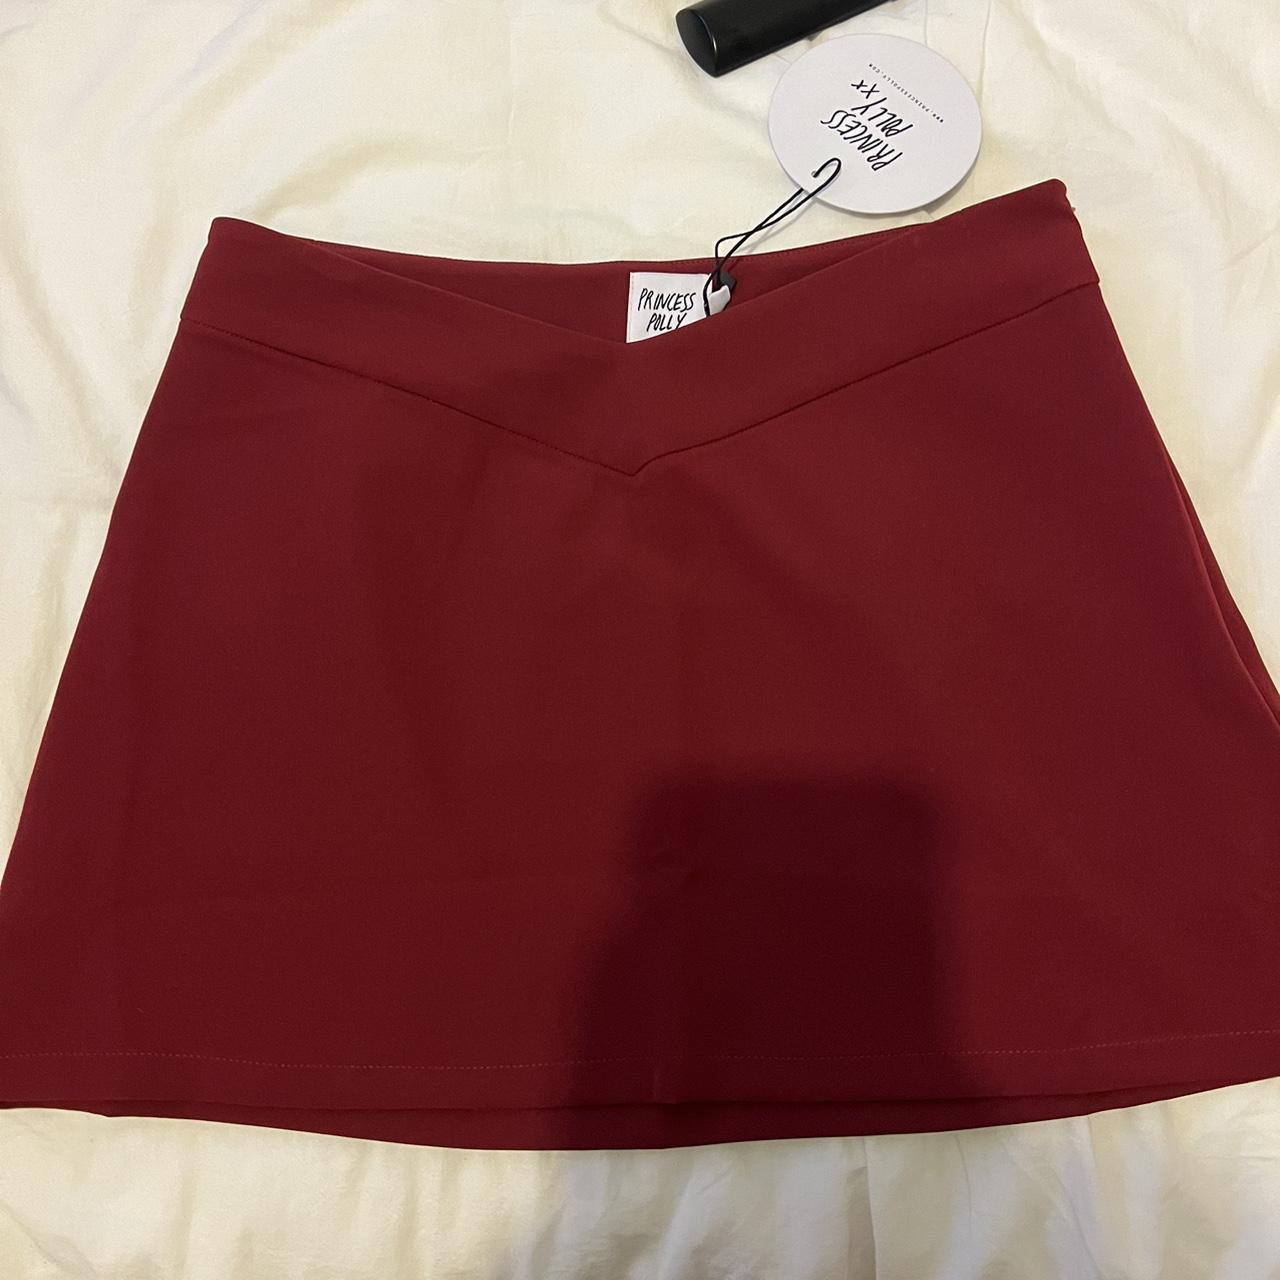 Princess Polly mini skirt Brand new with tags Size 8 - Depop